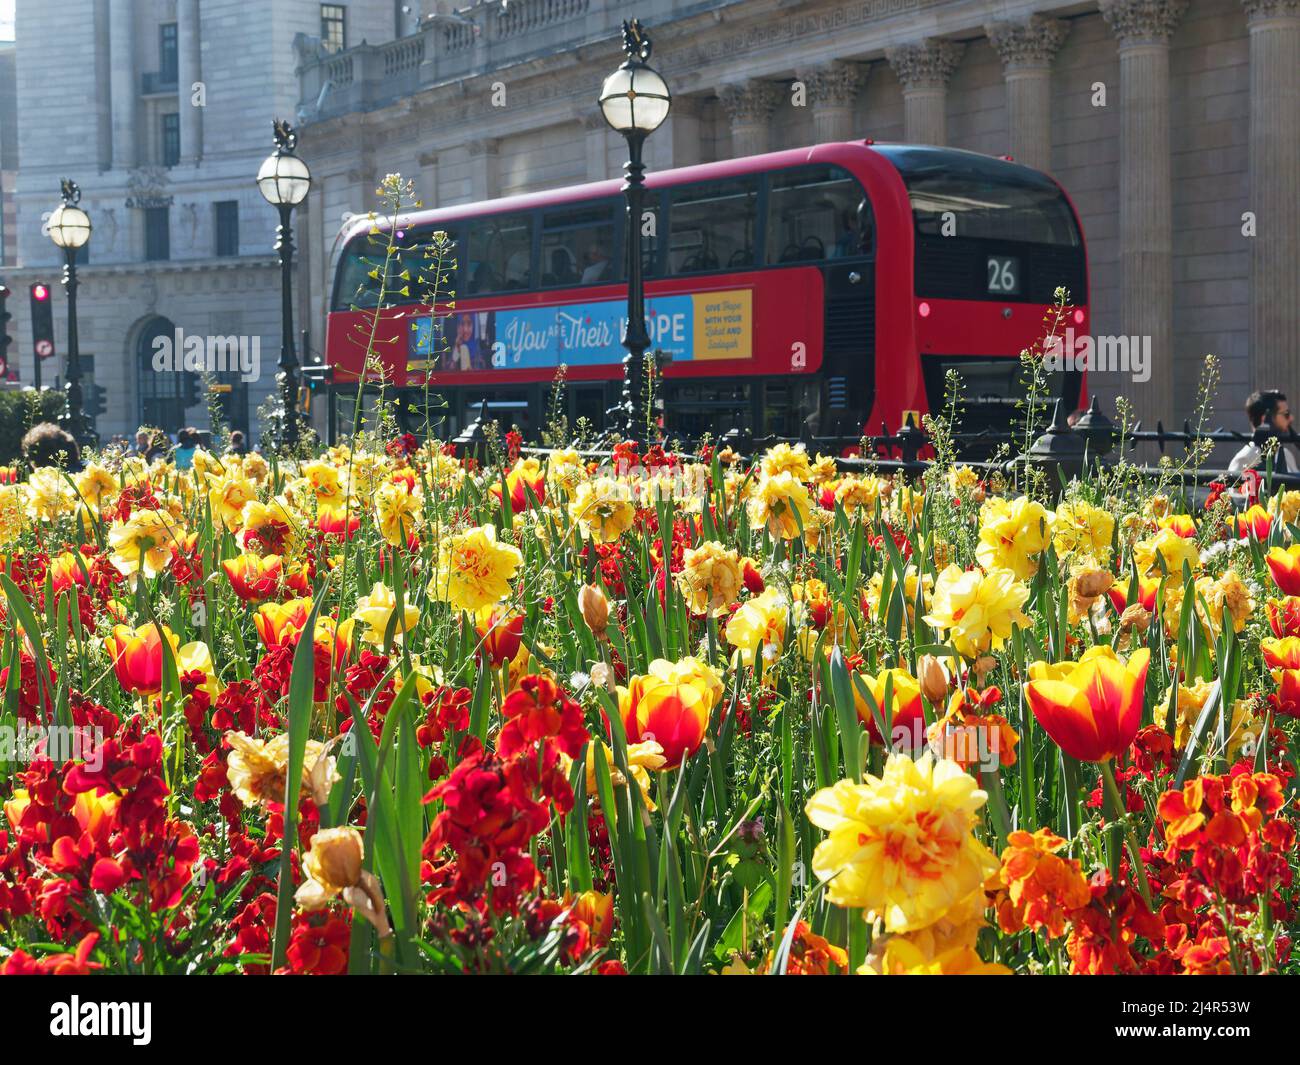 View of a London Bus stopped outside the Bank of England on a bright spring day with colourful spring flowers in the foreground Stock Photo